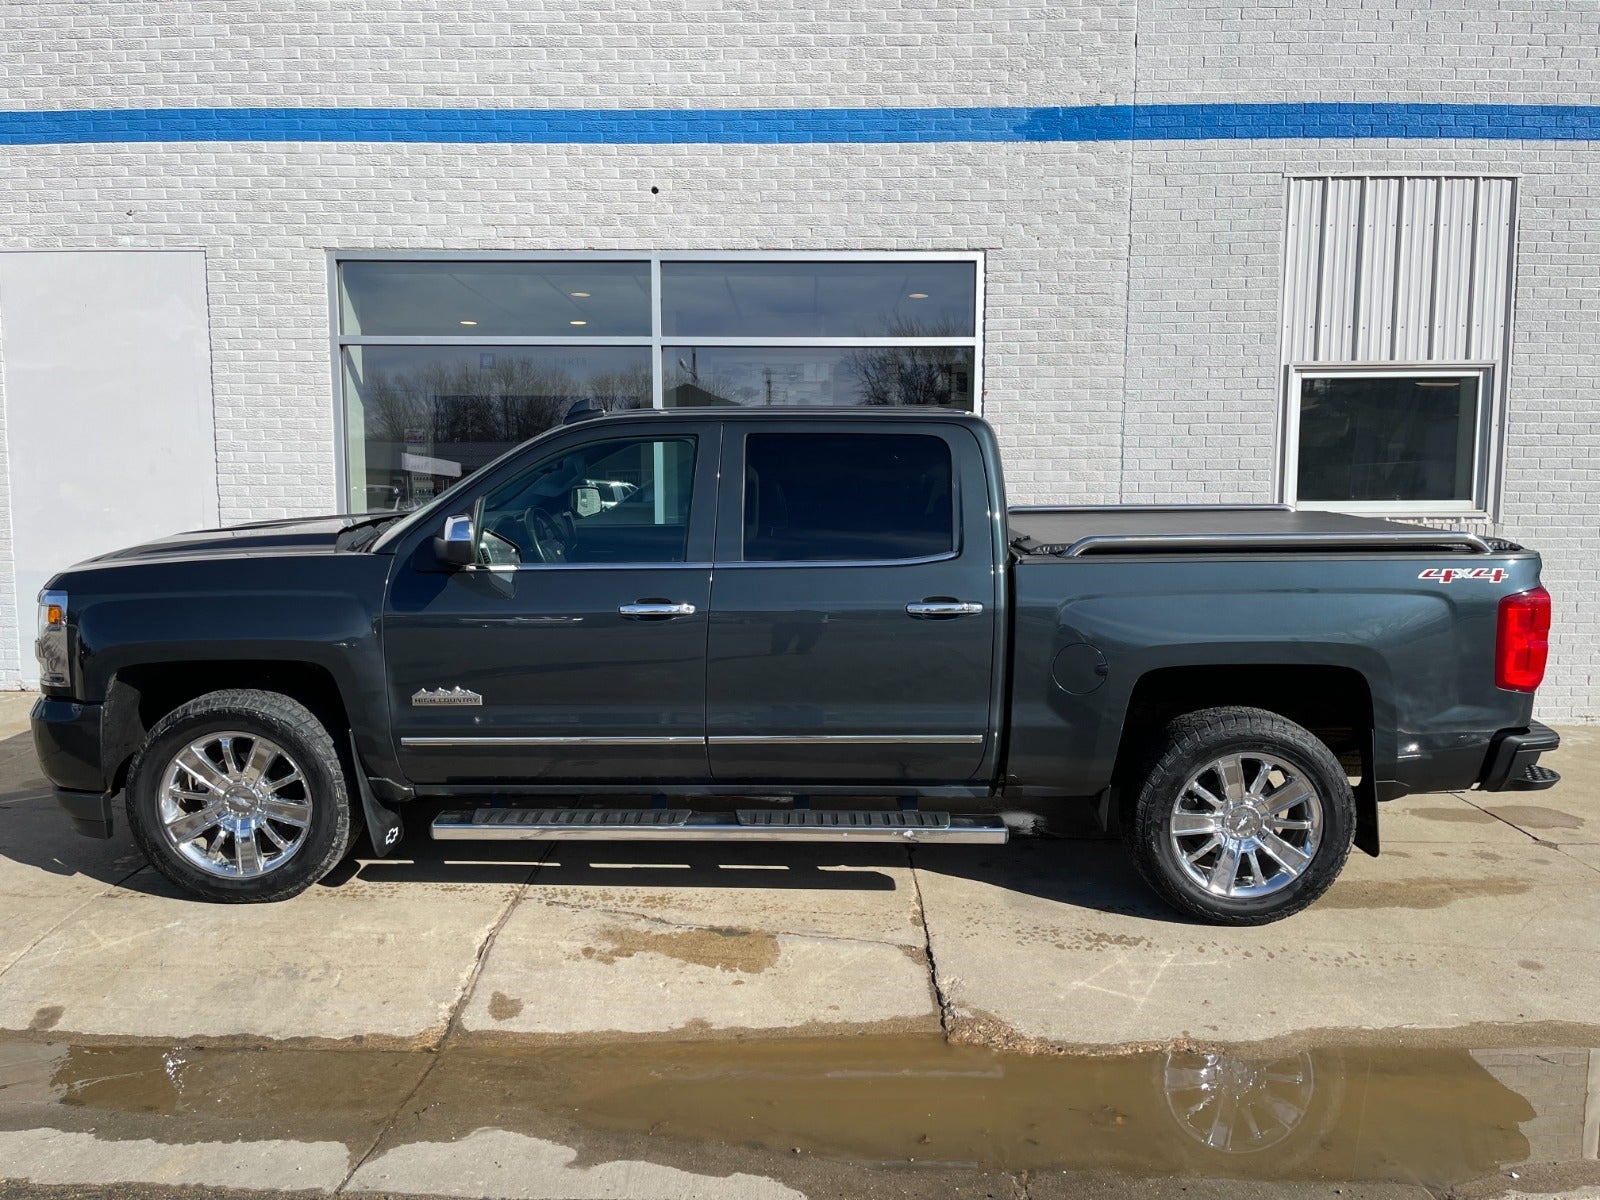 Used 2017 Chevrolet Silverado 1500 High Country with VIN 3GCUKTEC5HG163251 for sale in Edgerton, Minnesota